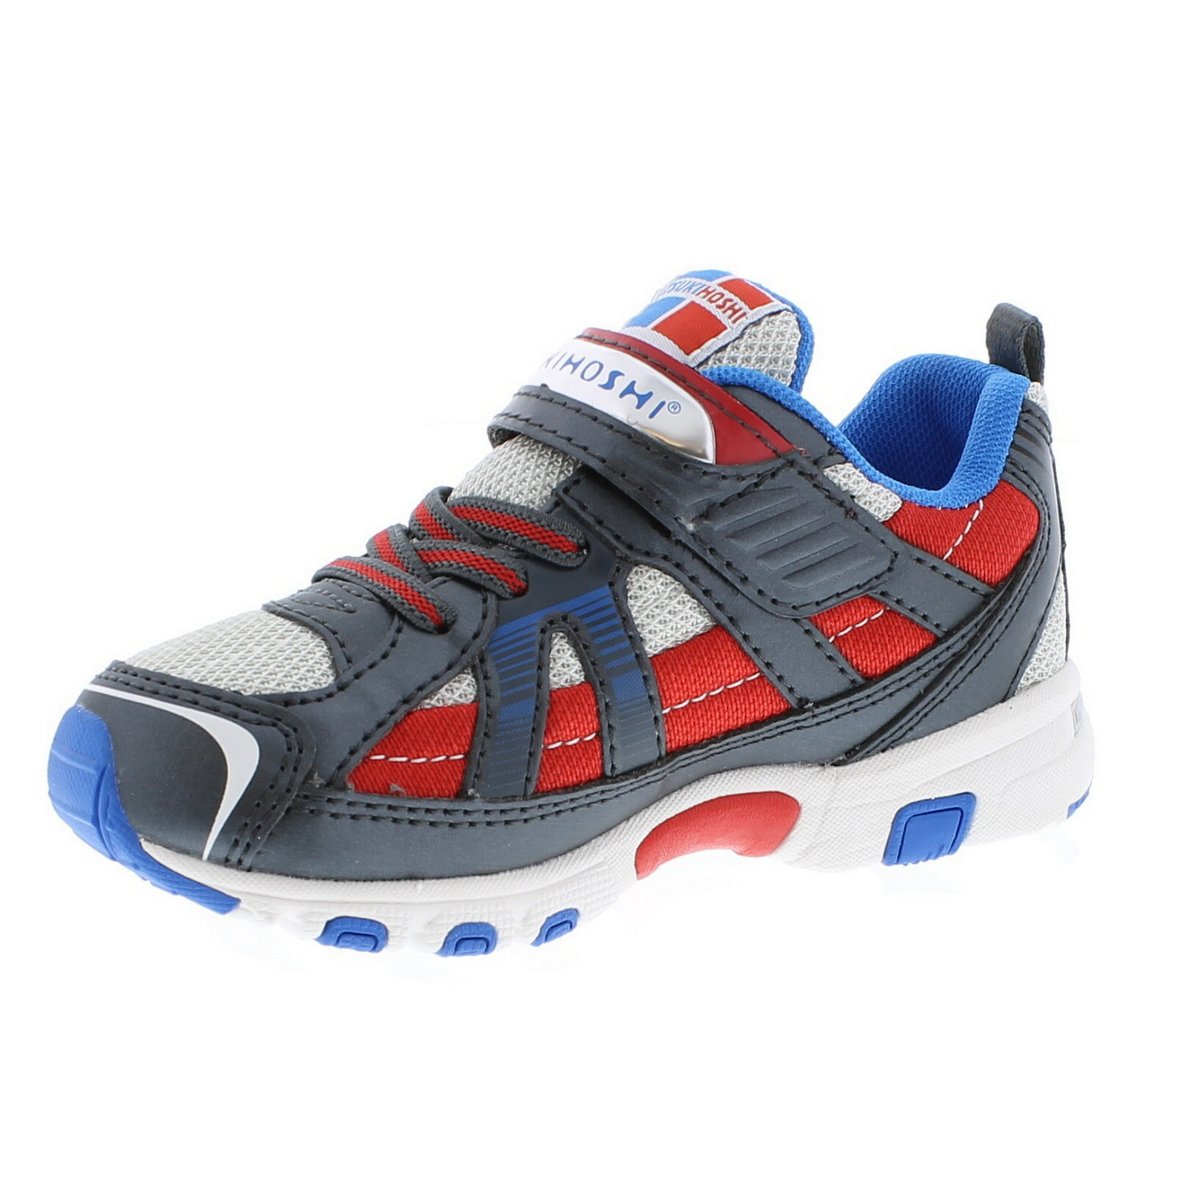 Child Tsukihoshi Storm Sneaker in Red/Gray from the front view